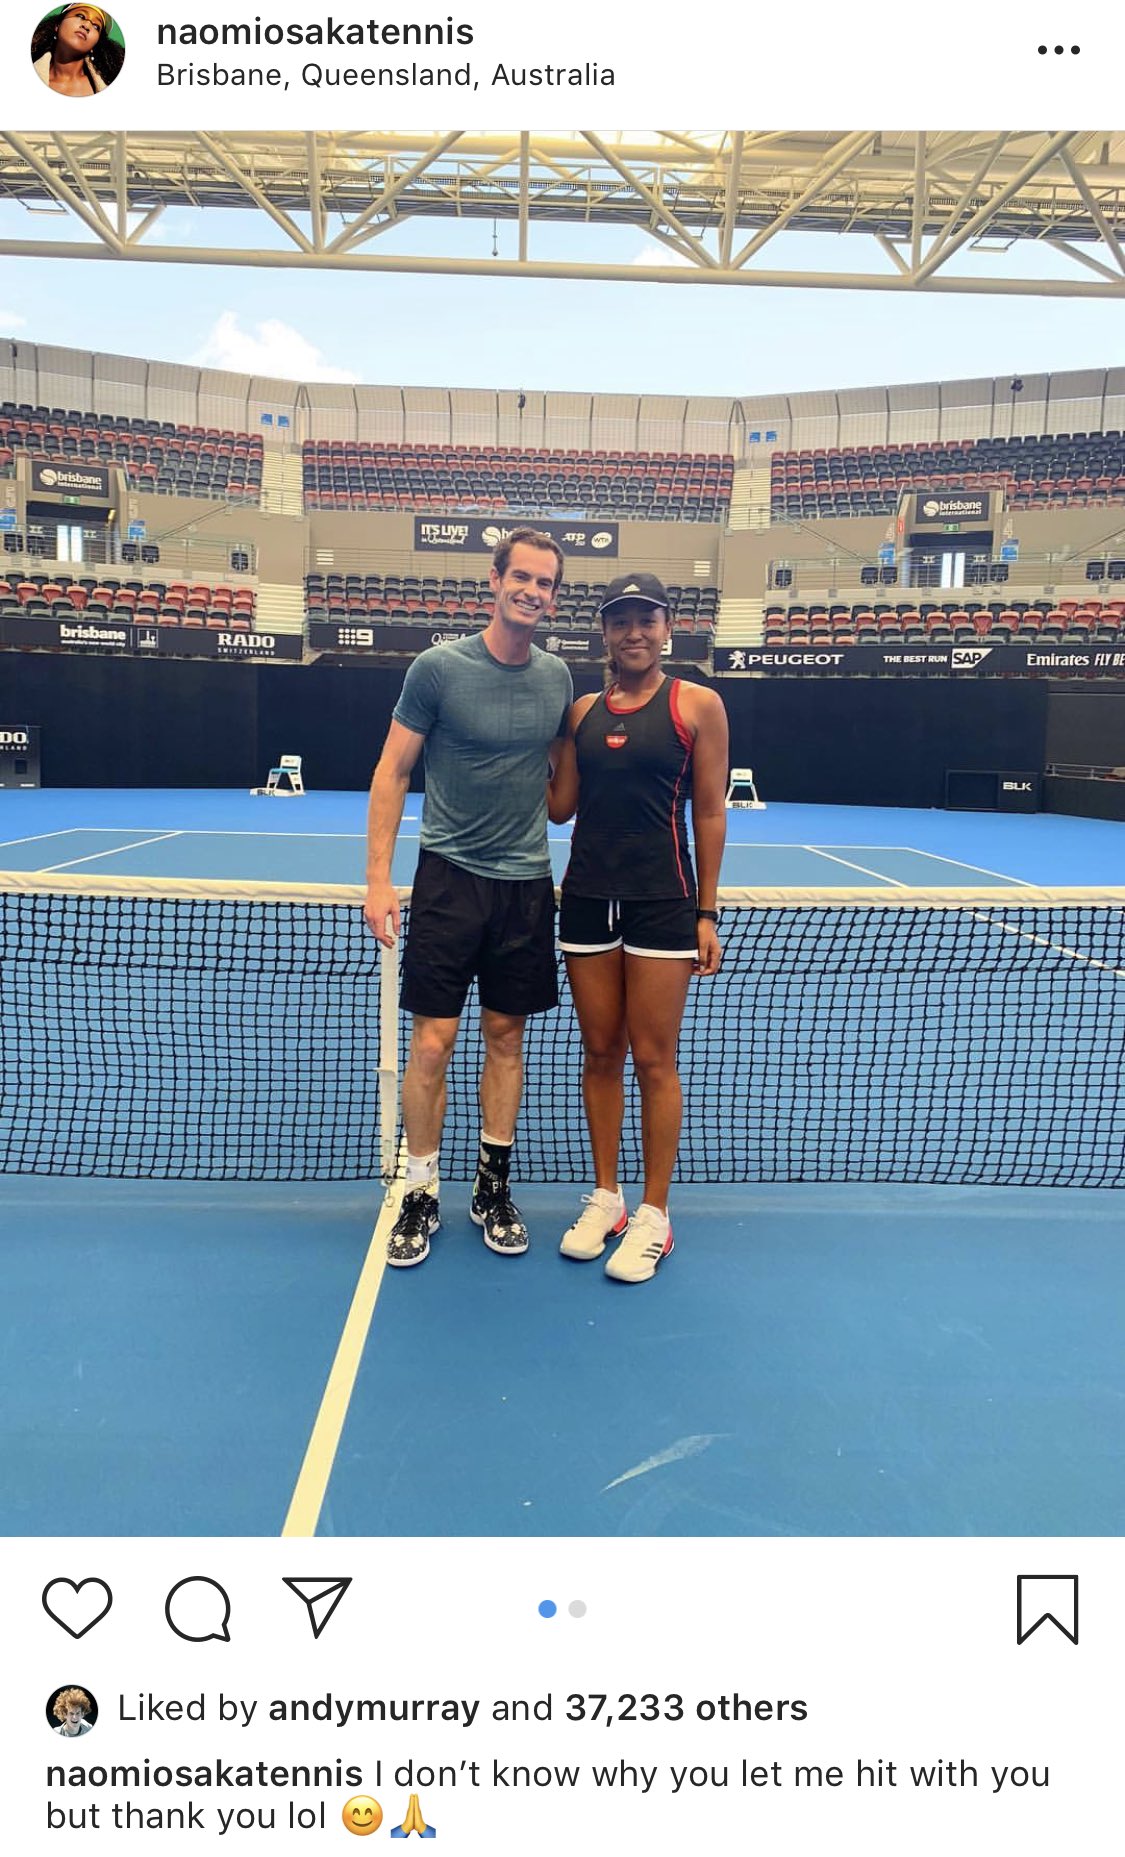 Andy Murray Fans on X: "Andy hitting with U.S Open Champ Naomi Osaka in  Brisbane. Looks like Andy is going to be wearing Nike shoes in 2019 too.  https://t.co/PjarGekH8K" / X